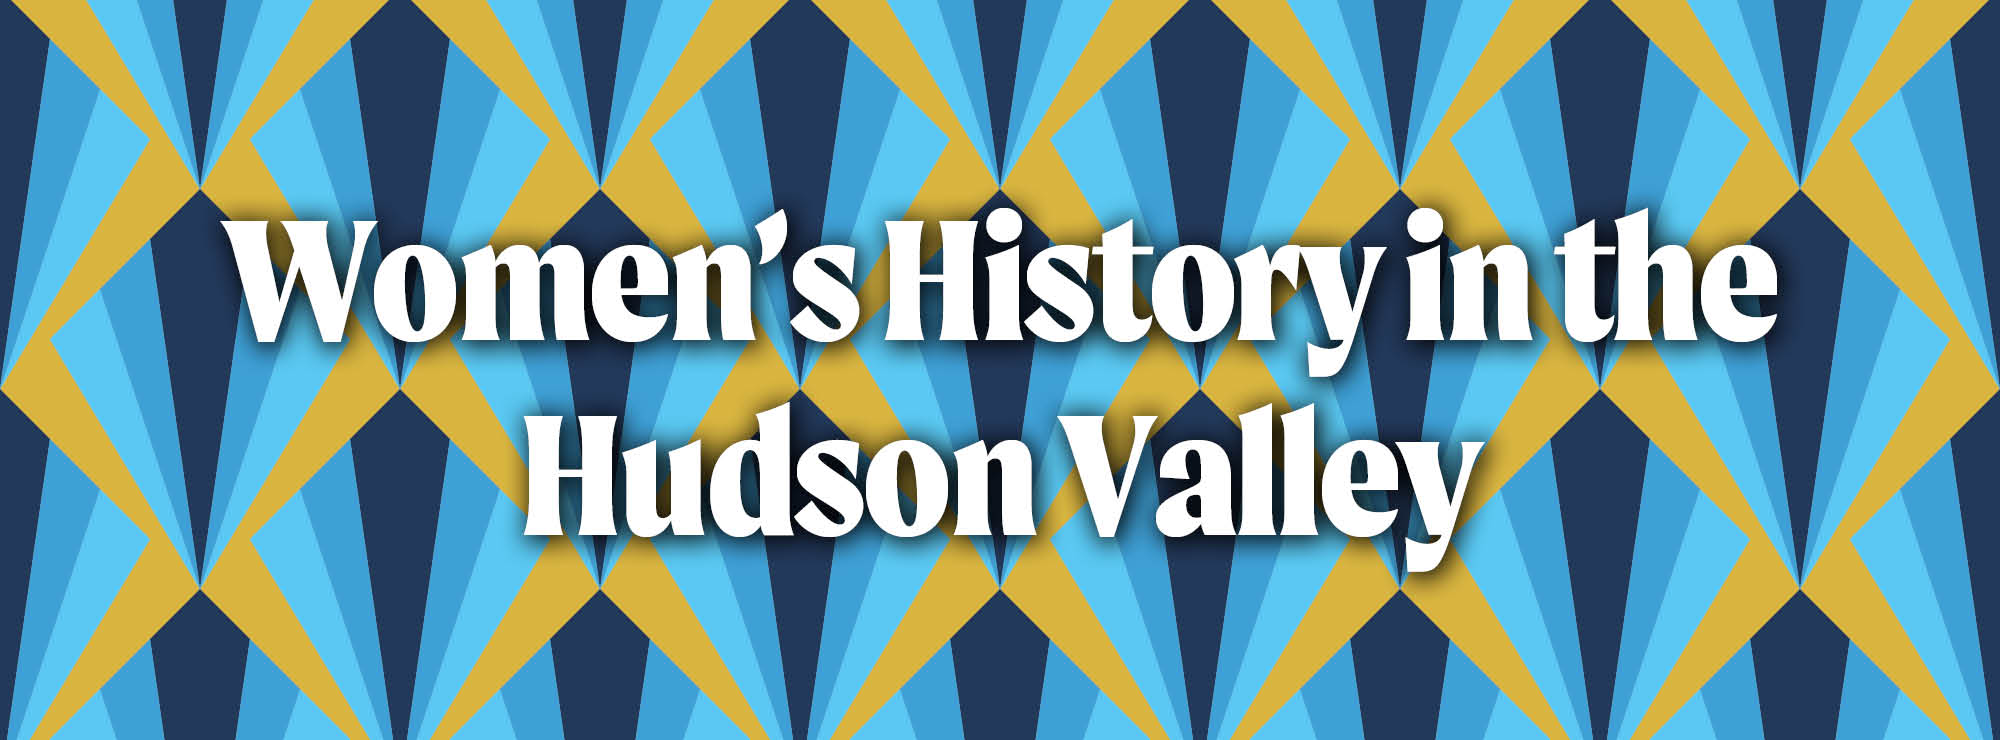 Women’s History in the Hudson Valley - Ten Stories from Columbia and Dutchess Counties - 2022